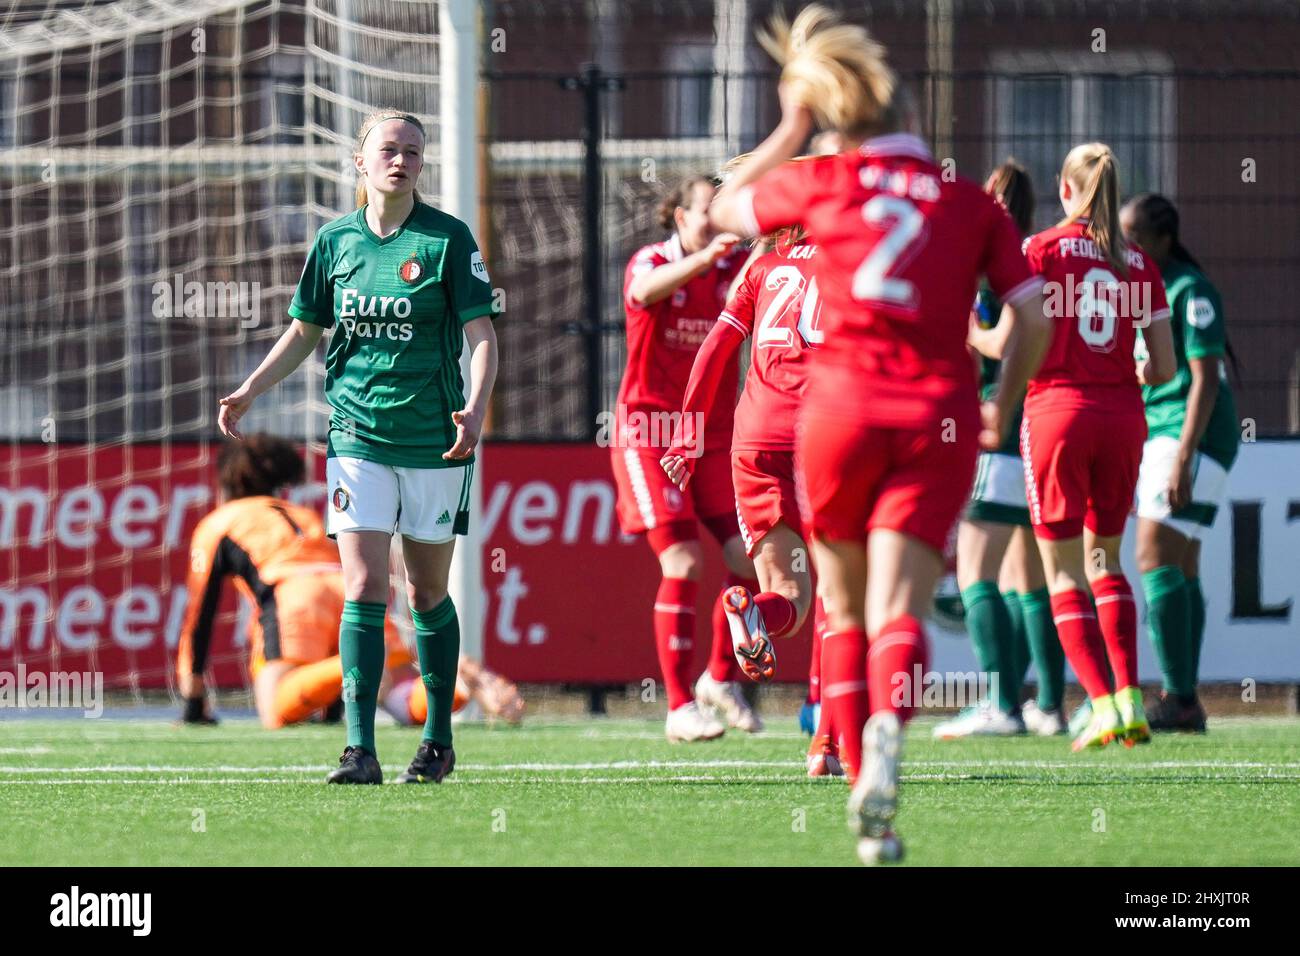 Enschede - Kim Hendriks of Feyenoord V1 reacts to the 3-0 by Fenna Kalma of FC Twente Vrouwen during the match between FC Twente V1 v Feyenoord V1 at Sportcampus Diekman on 13 March 2022 in Enschede, Netherlands. (Box to Box Pictures/Yannick Verhoeven) Stock Photo